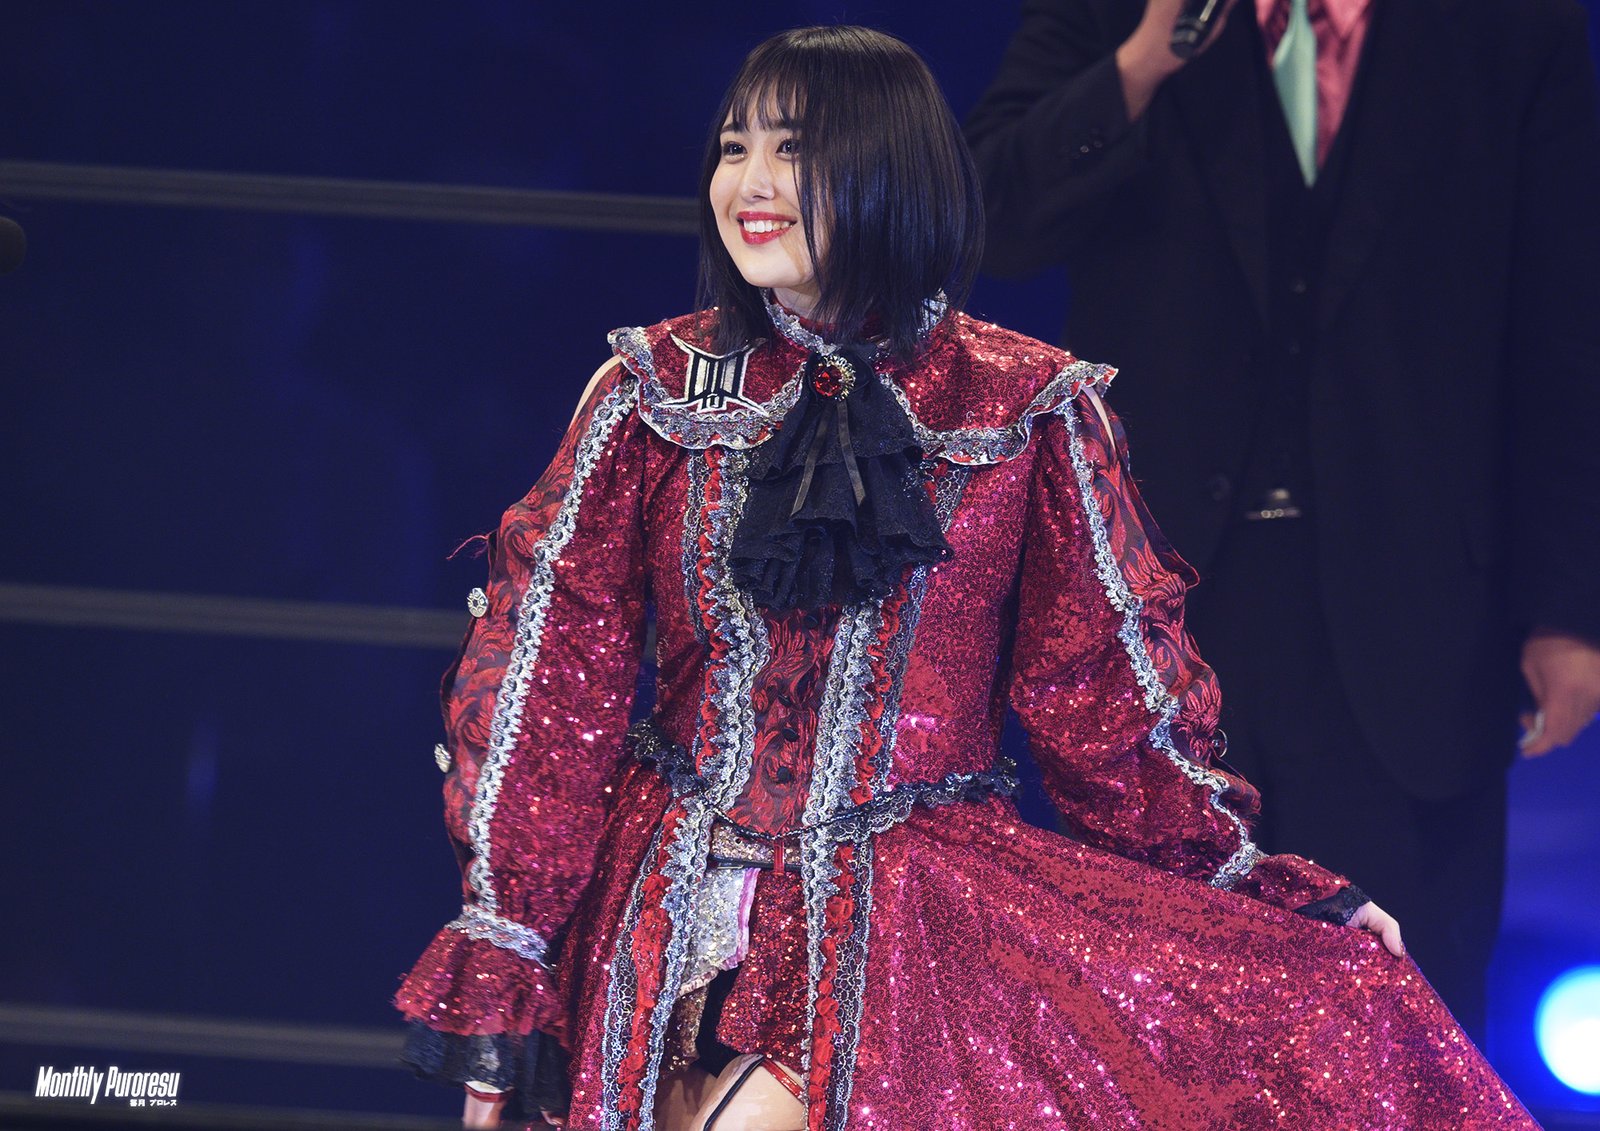 Himeka Opens Up About Harassment as Reason to Retire - Monthly Puroresu